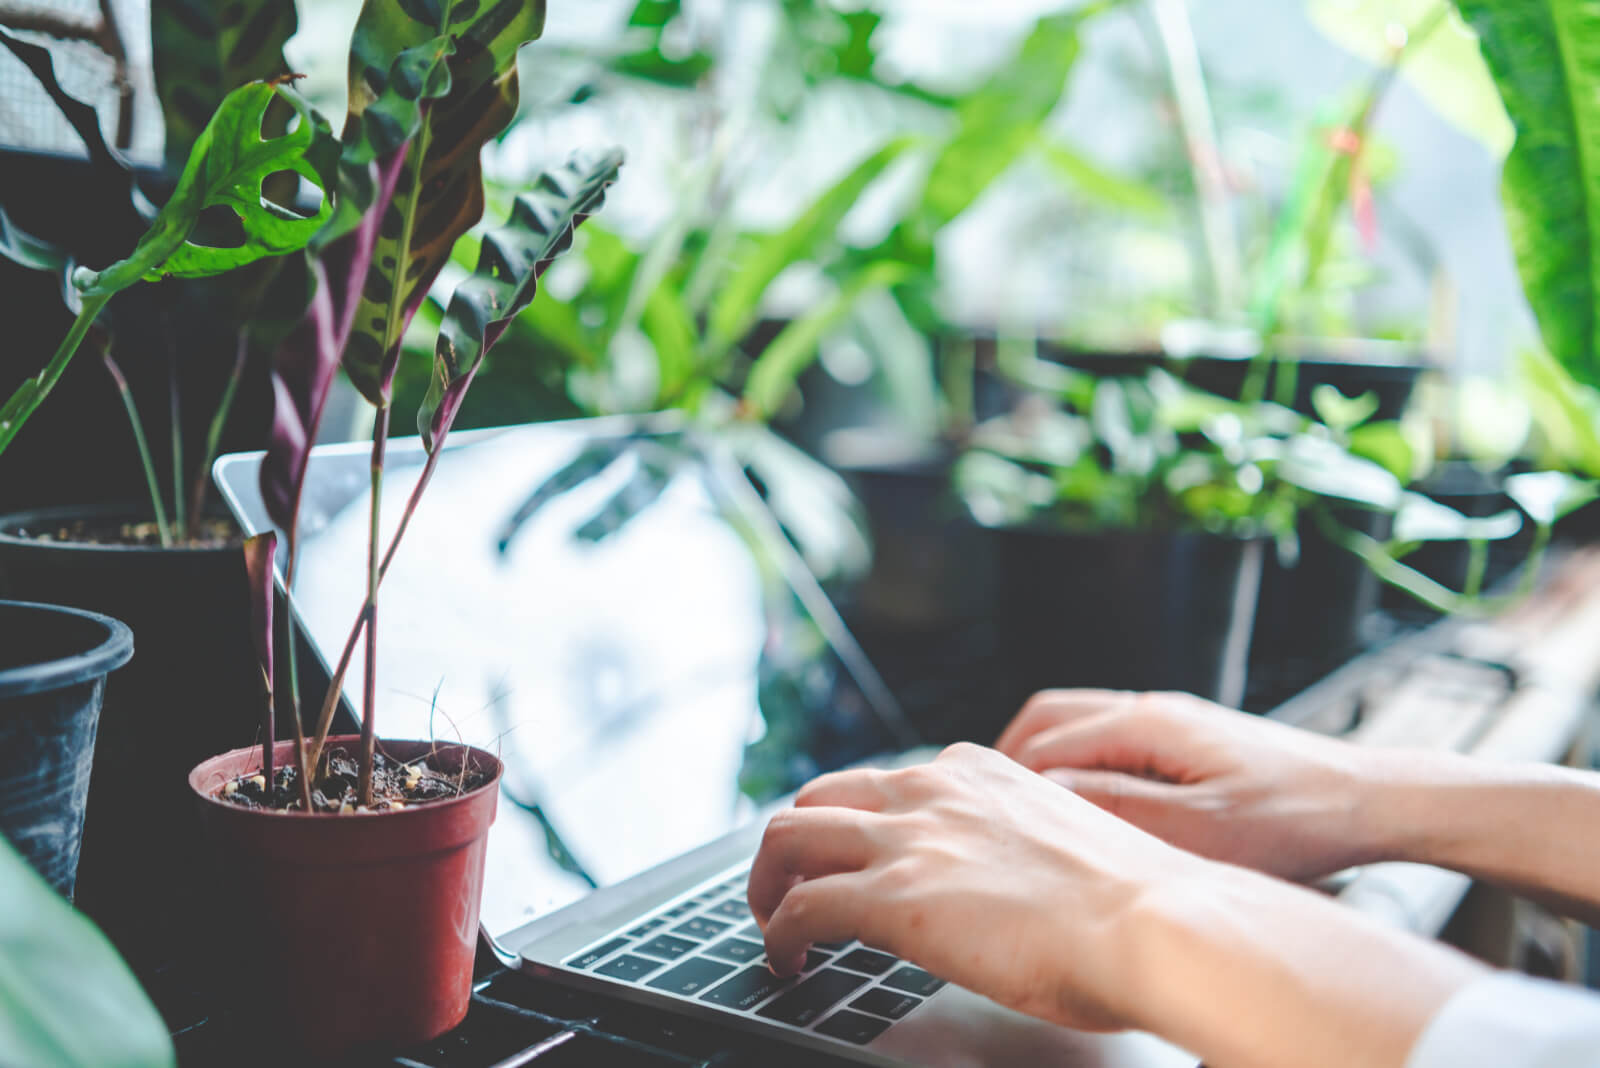 Sustainable website design: laptop and plants